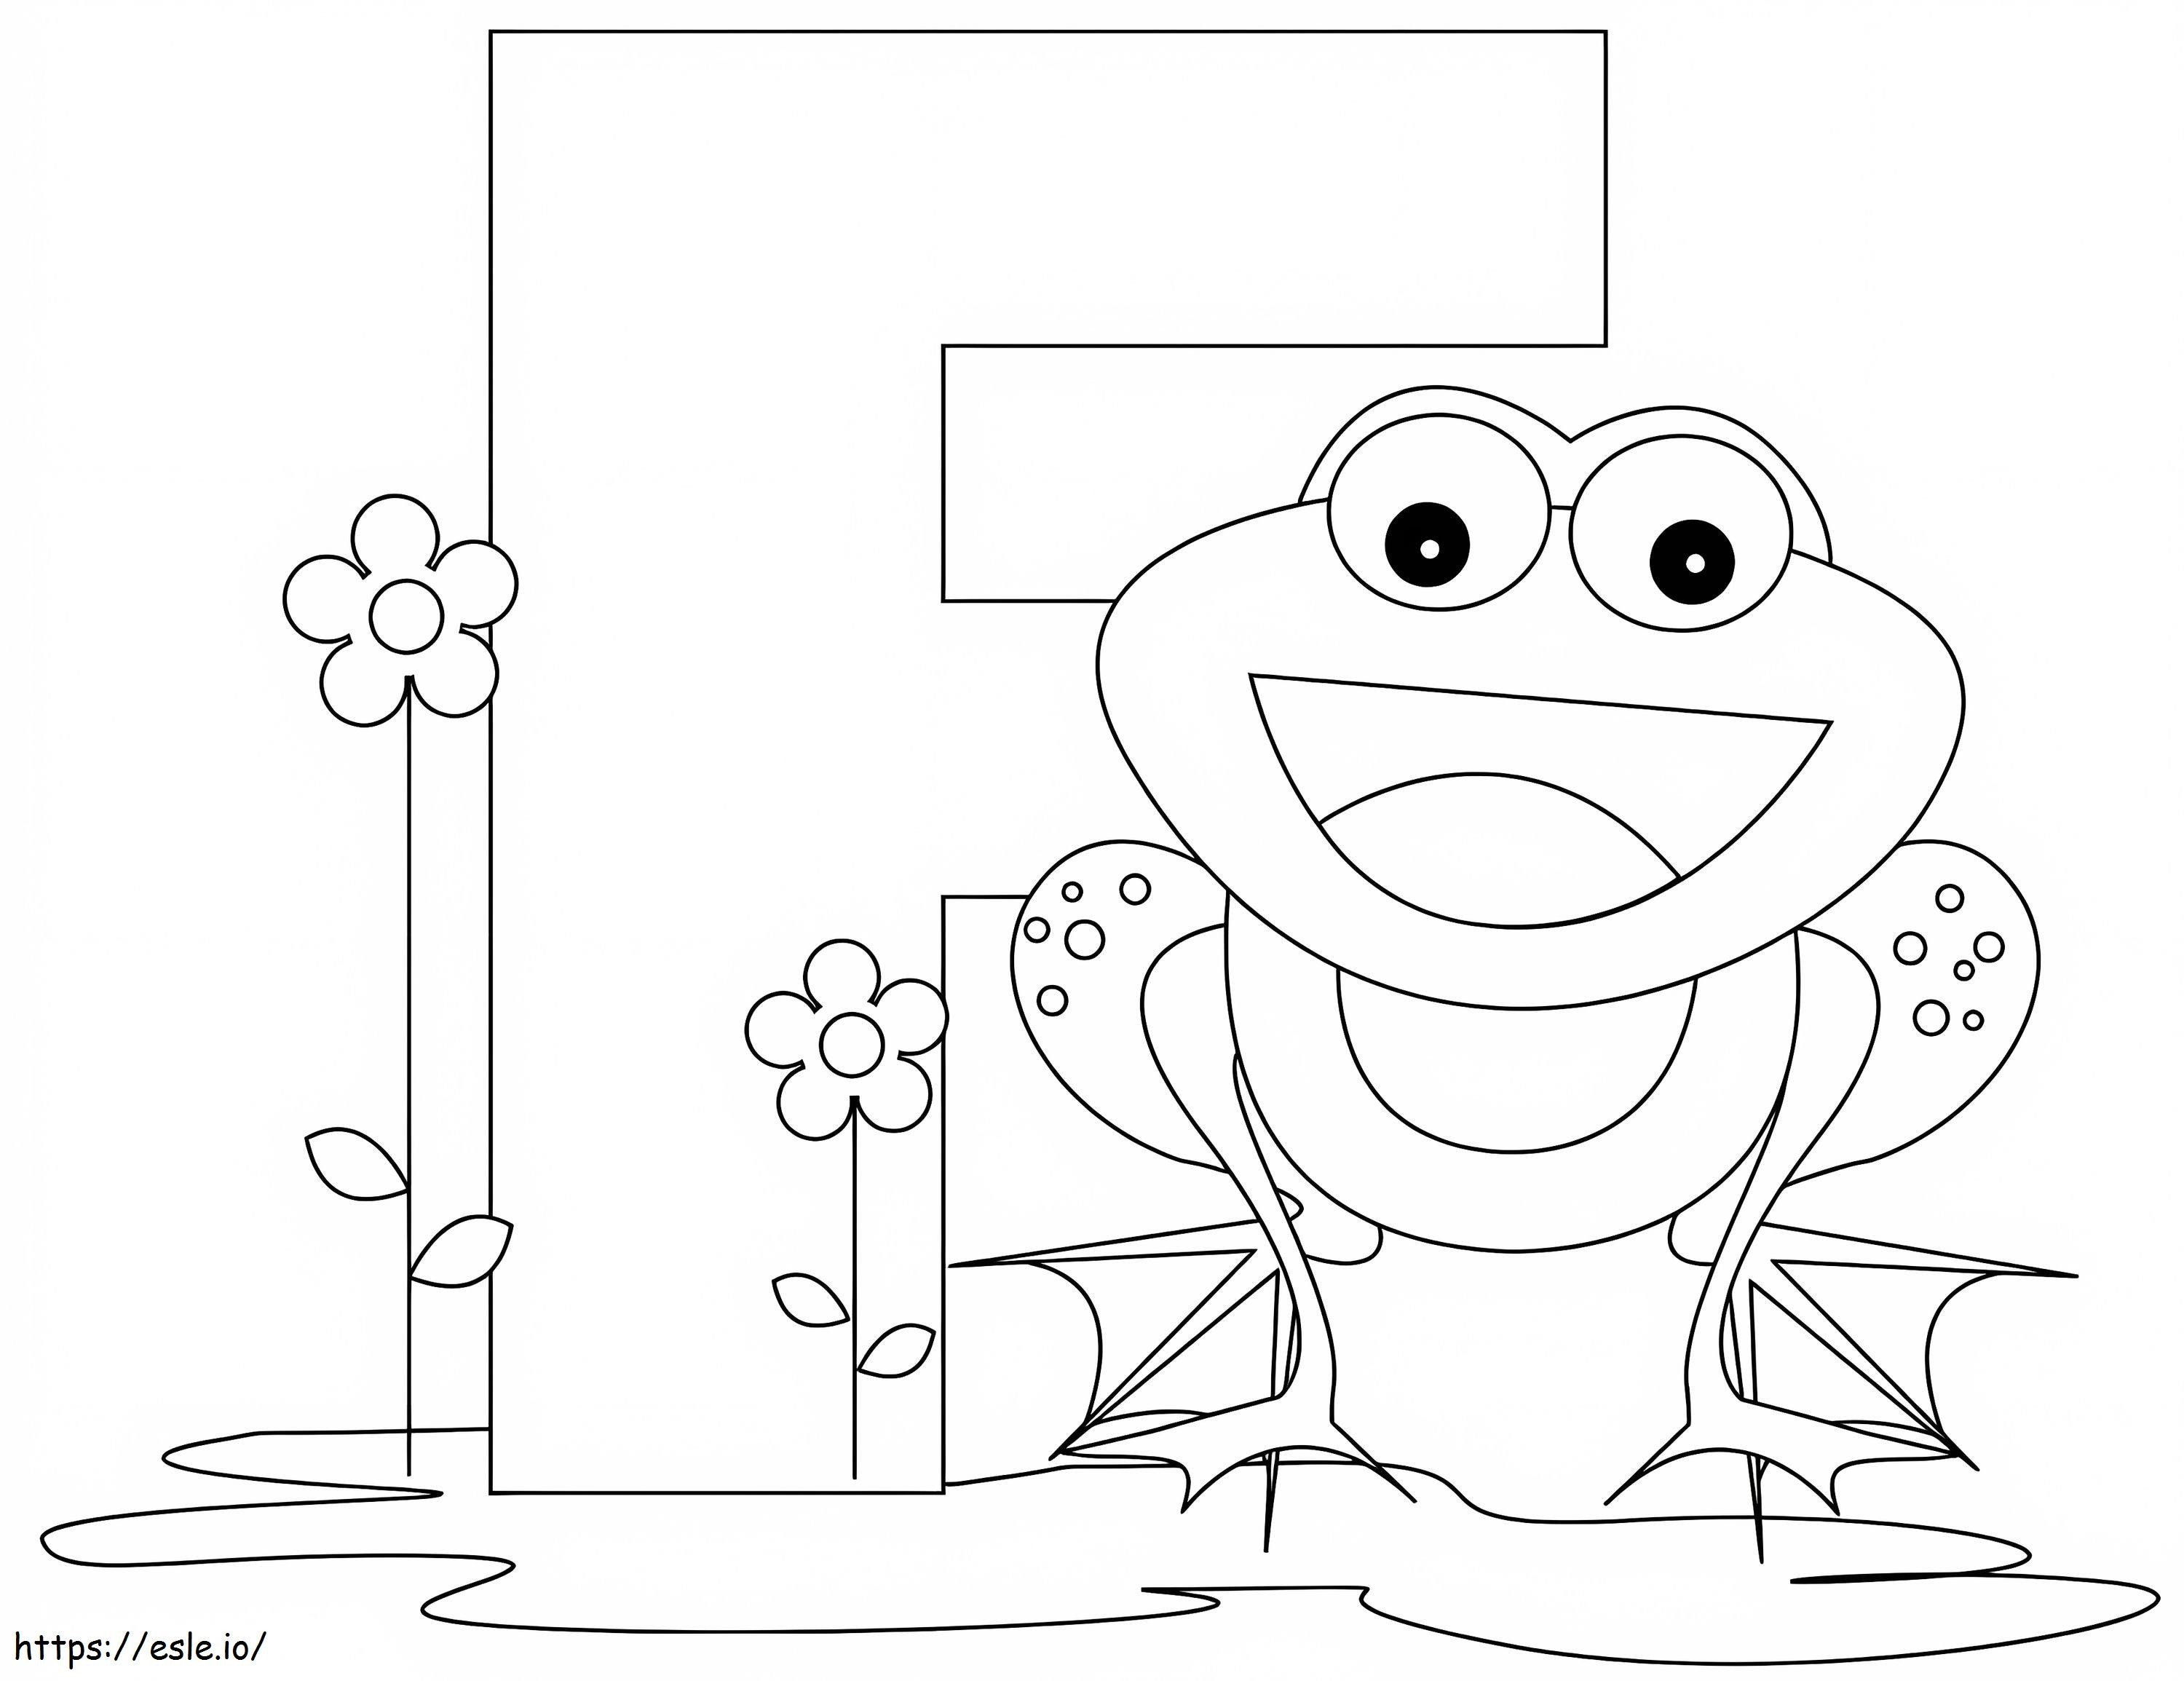 Letter F 3 coloring page